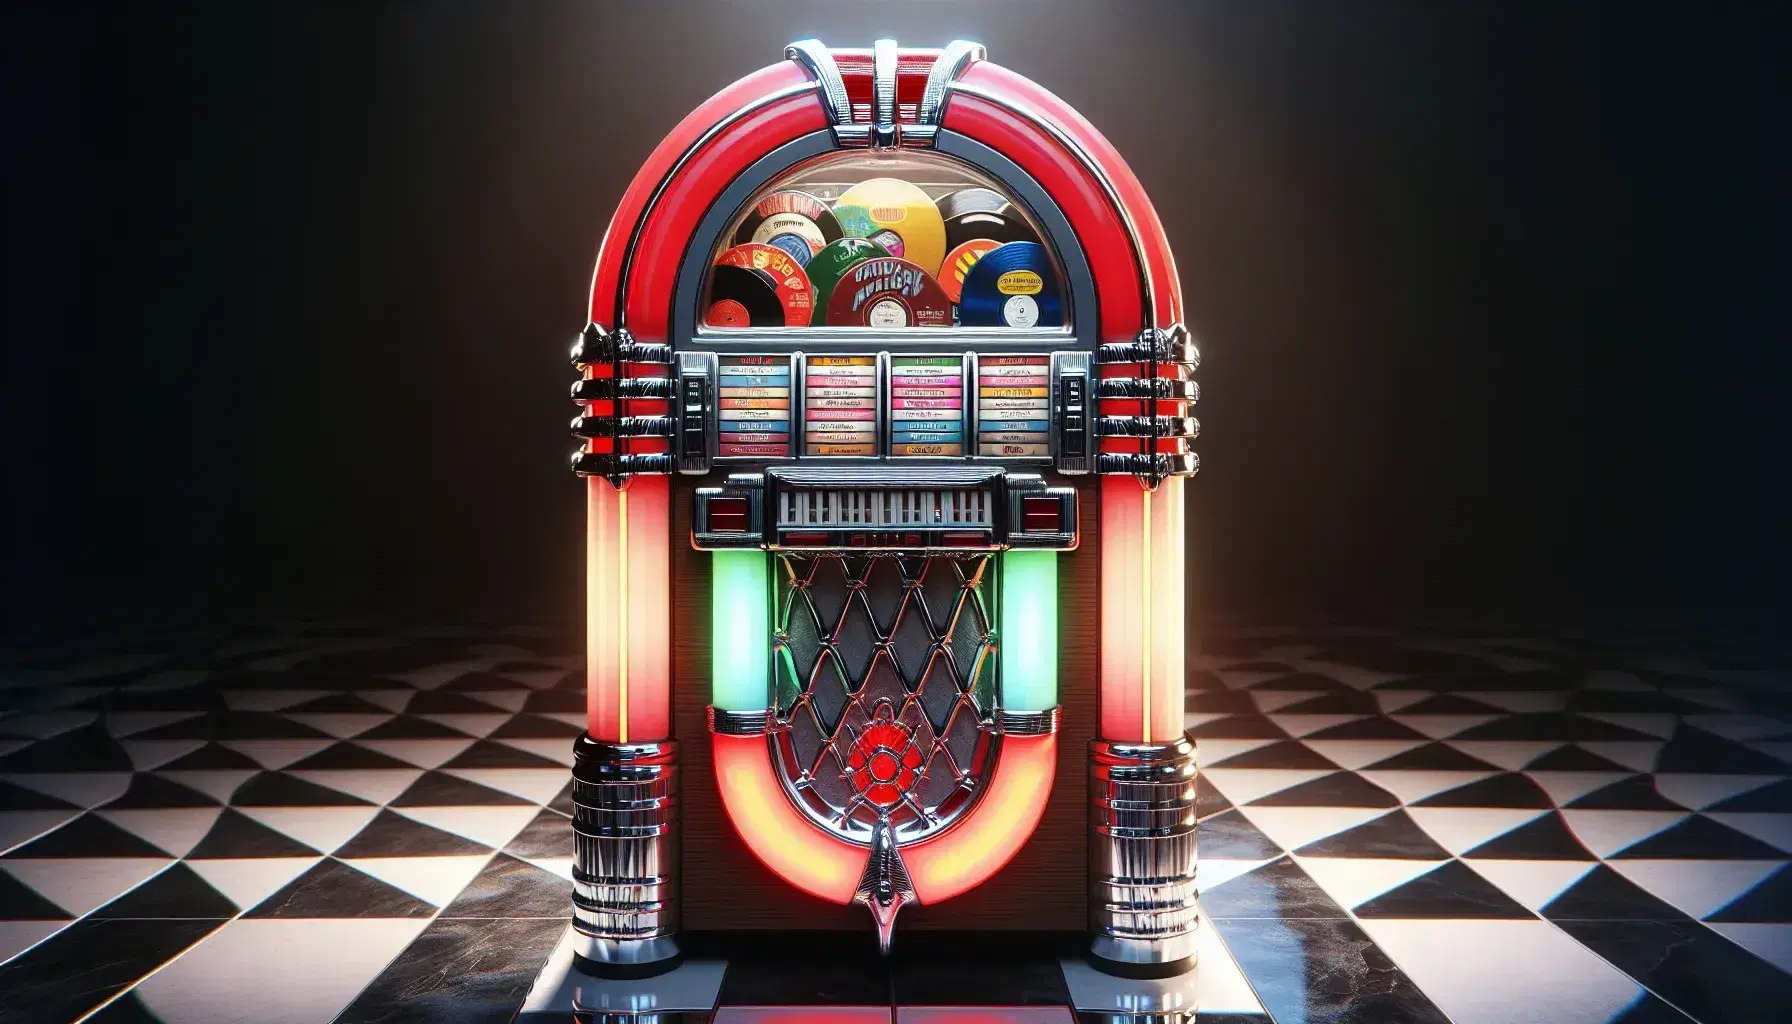 Vintage 1950s chrome jukebox with glossy red panel and colorful buttons, records visible behind glass, on a black and white tiled floor, guitar in background.